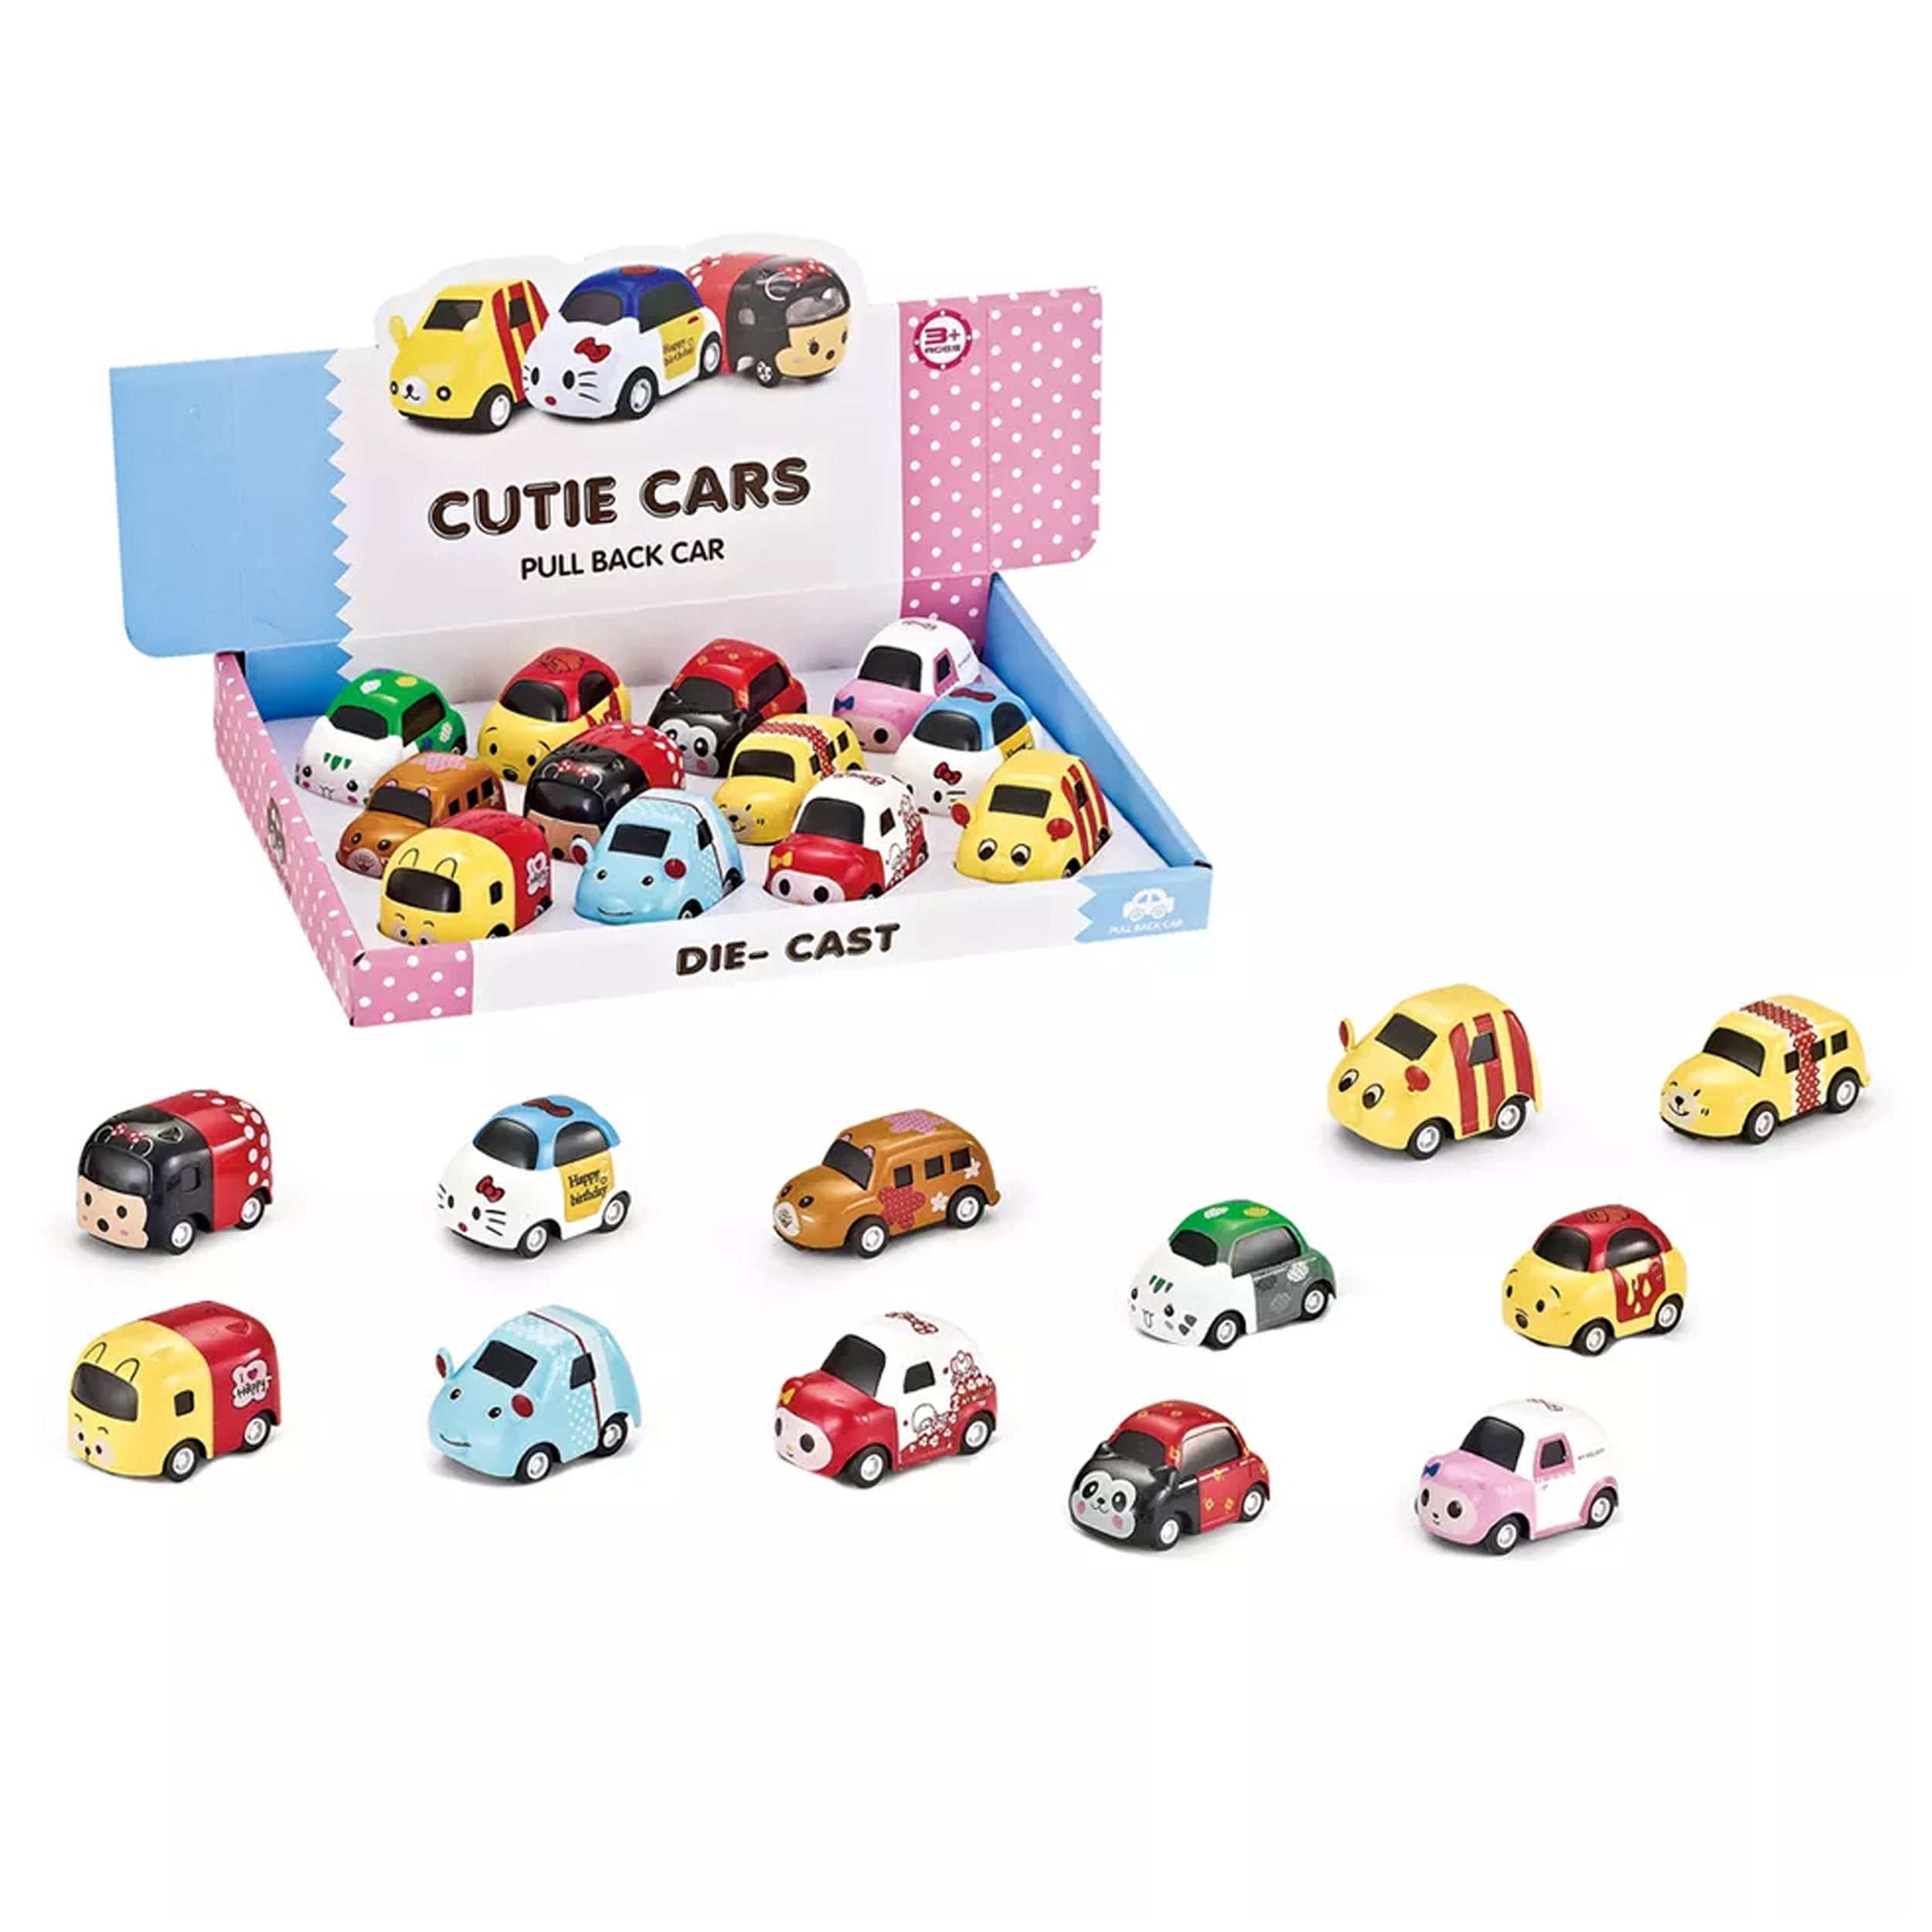 Mini Friction Die Cast Pull Back Metal Vehicle Toys - Perfect for Playtime and Collecting